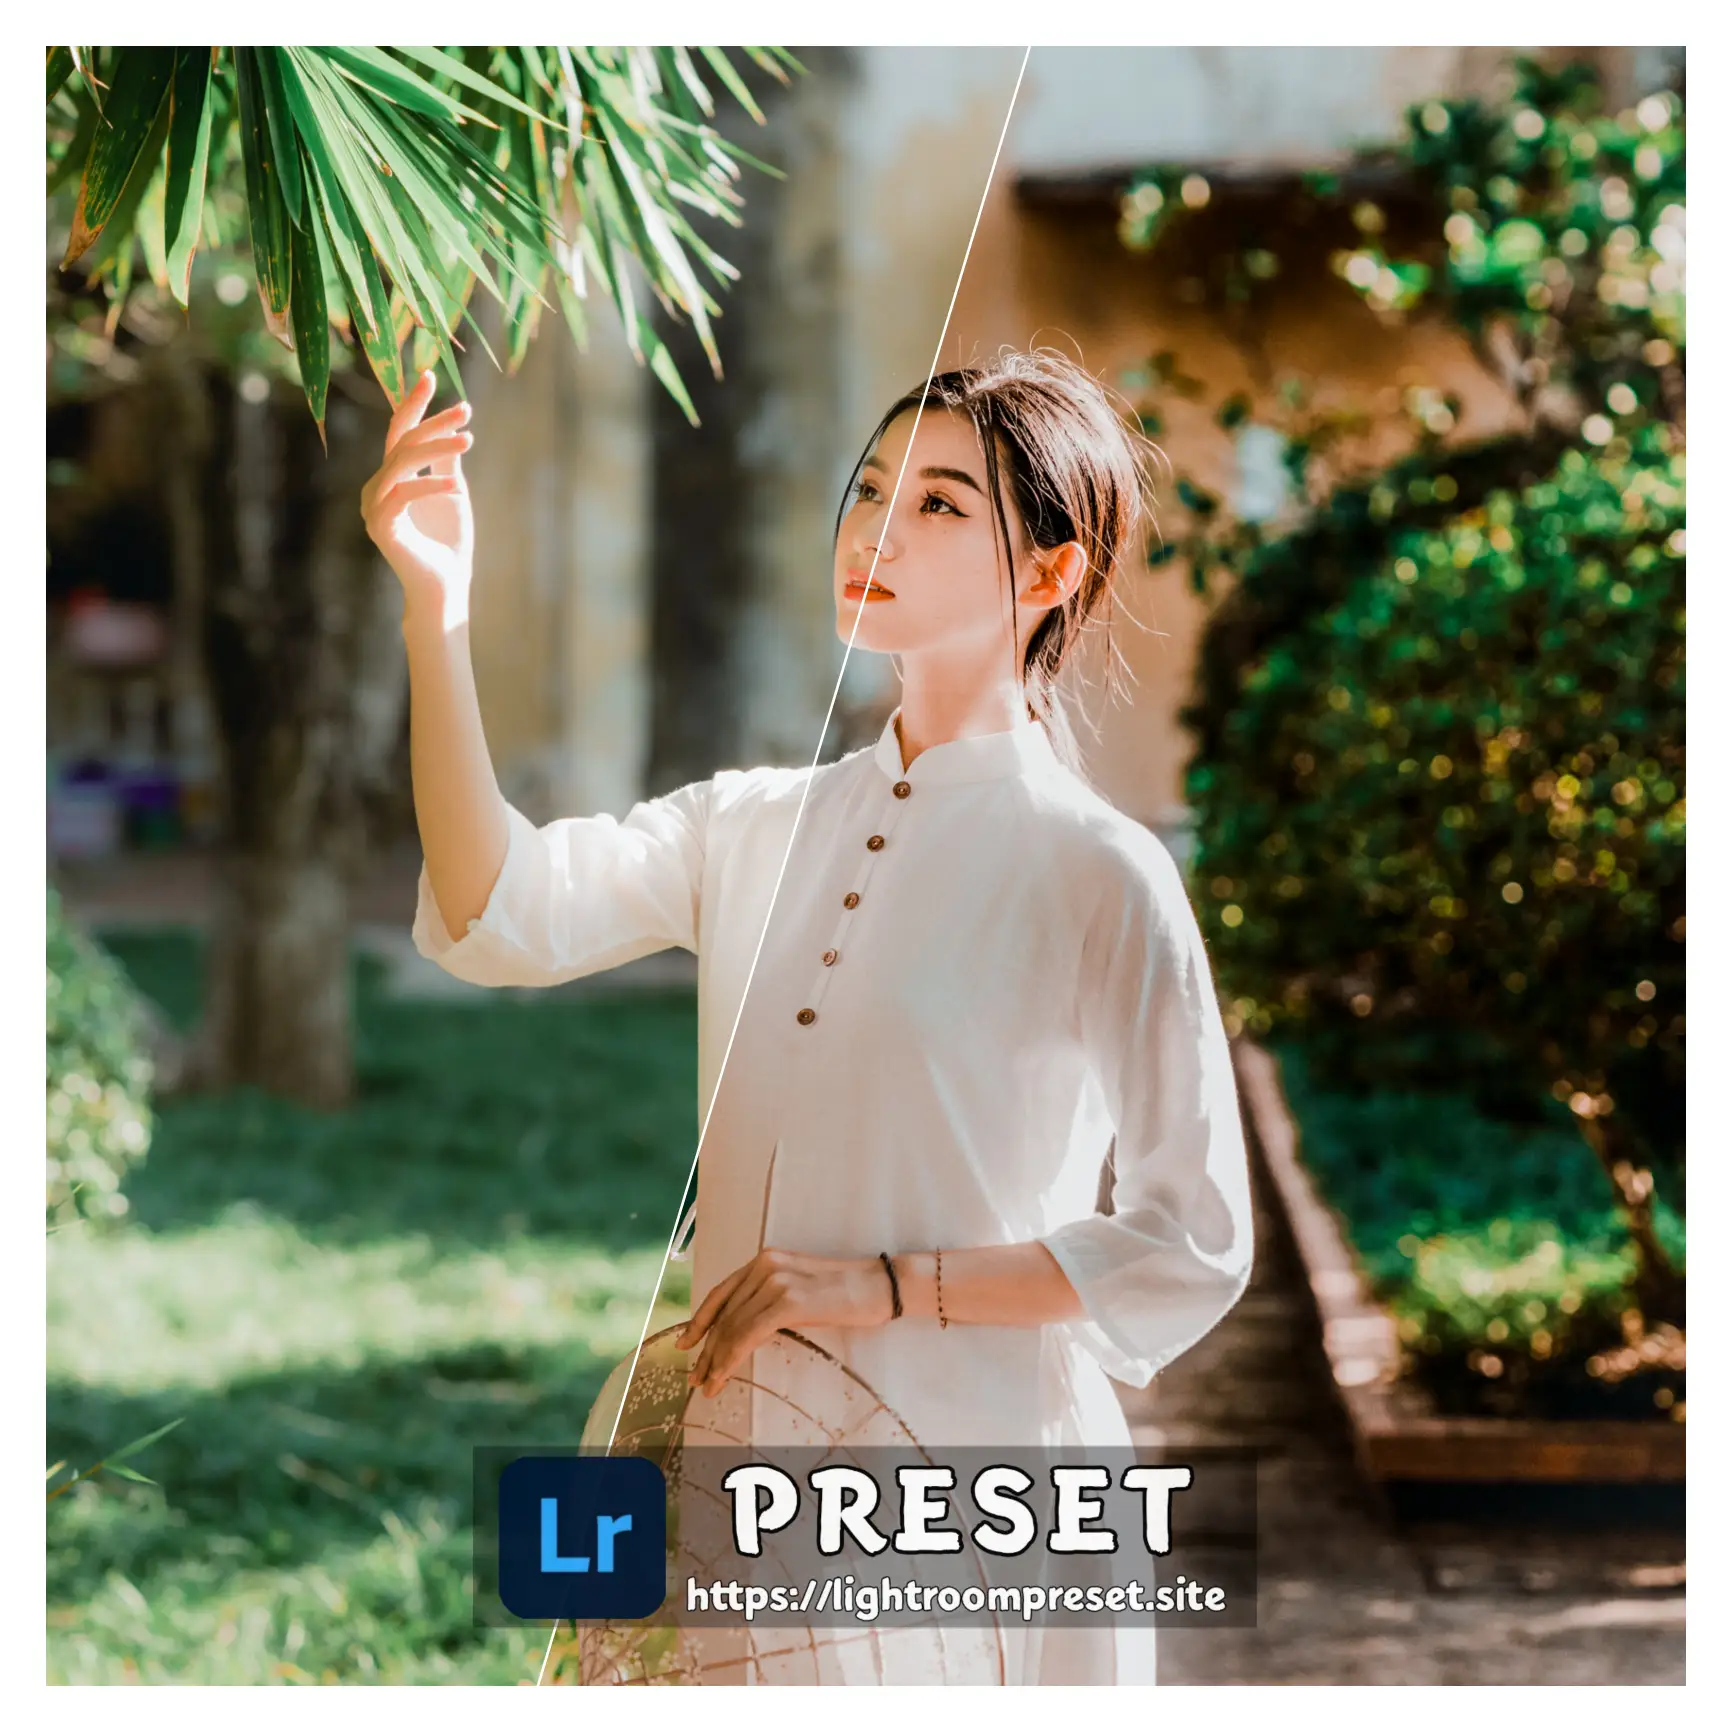 You are currently viewing Beauty presets for lightroom free download